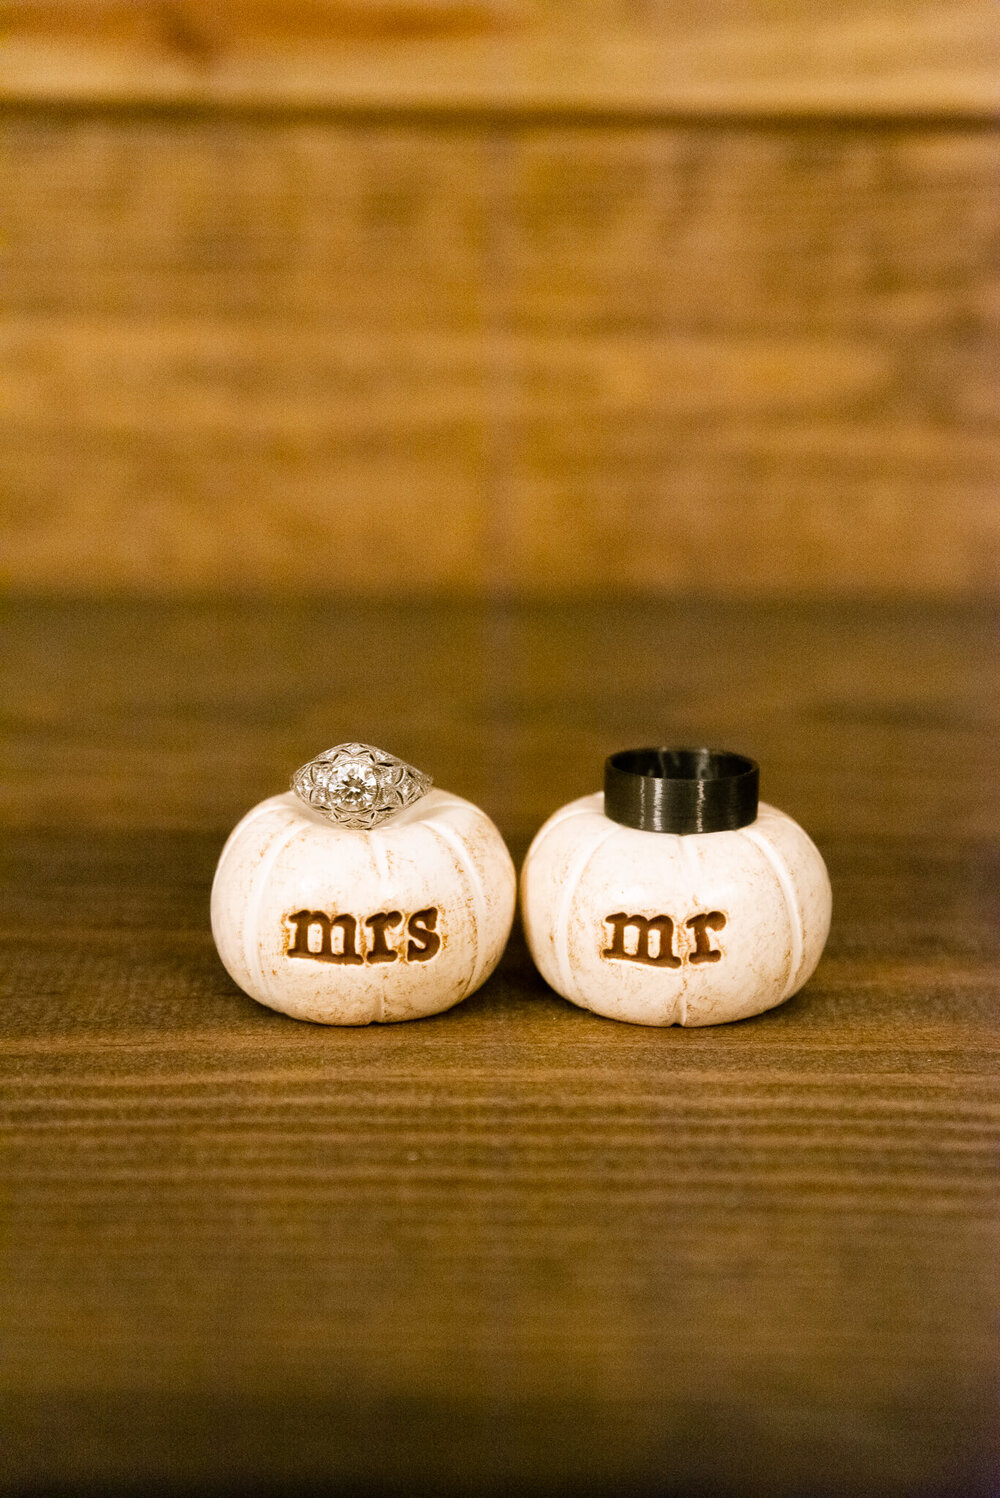 Wedding rings on top of mrs. and mr. mini pumpkins taken by Asheville wedding photographer Nick Levine Photography